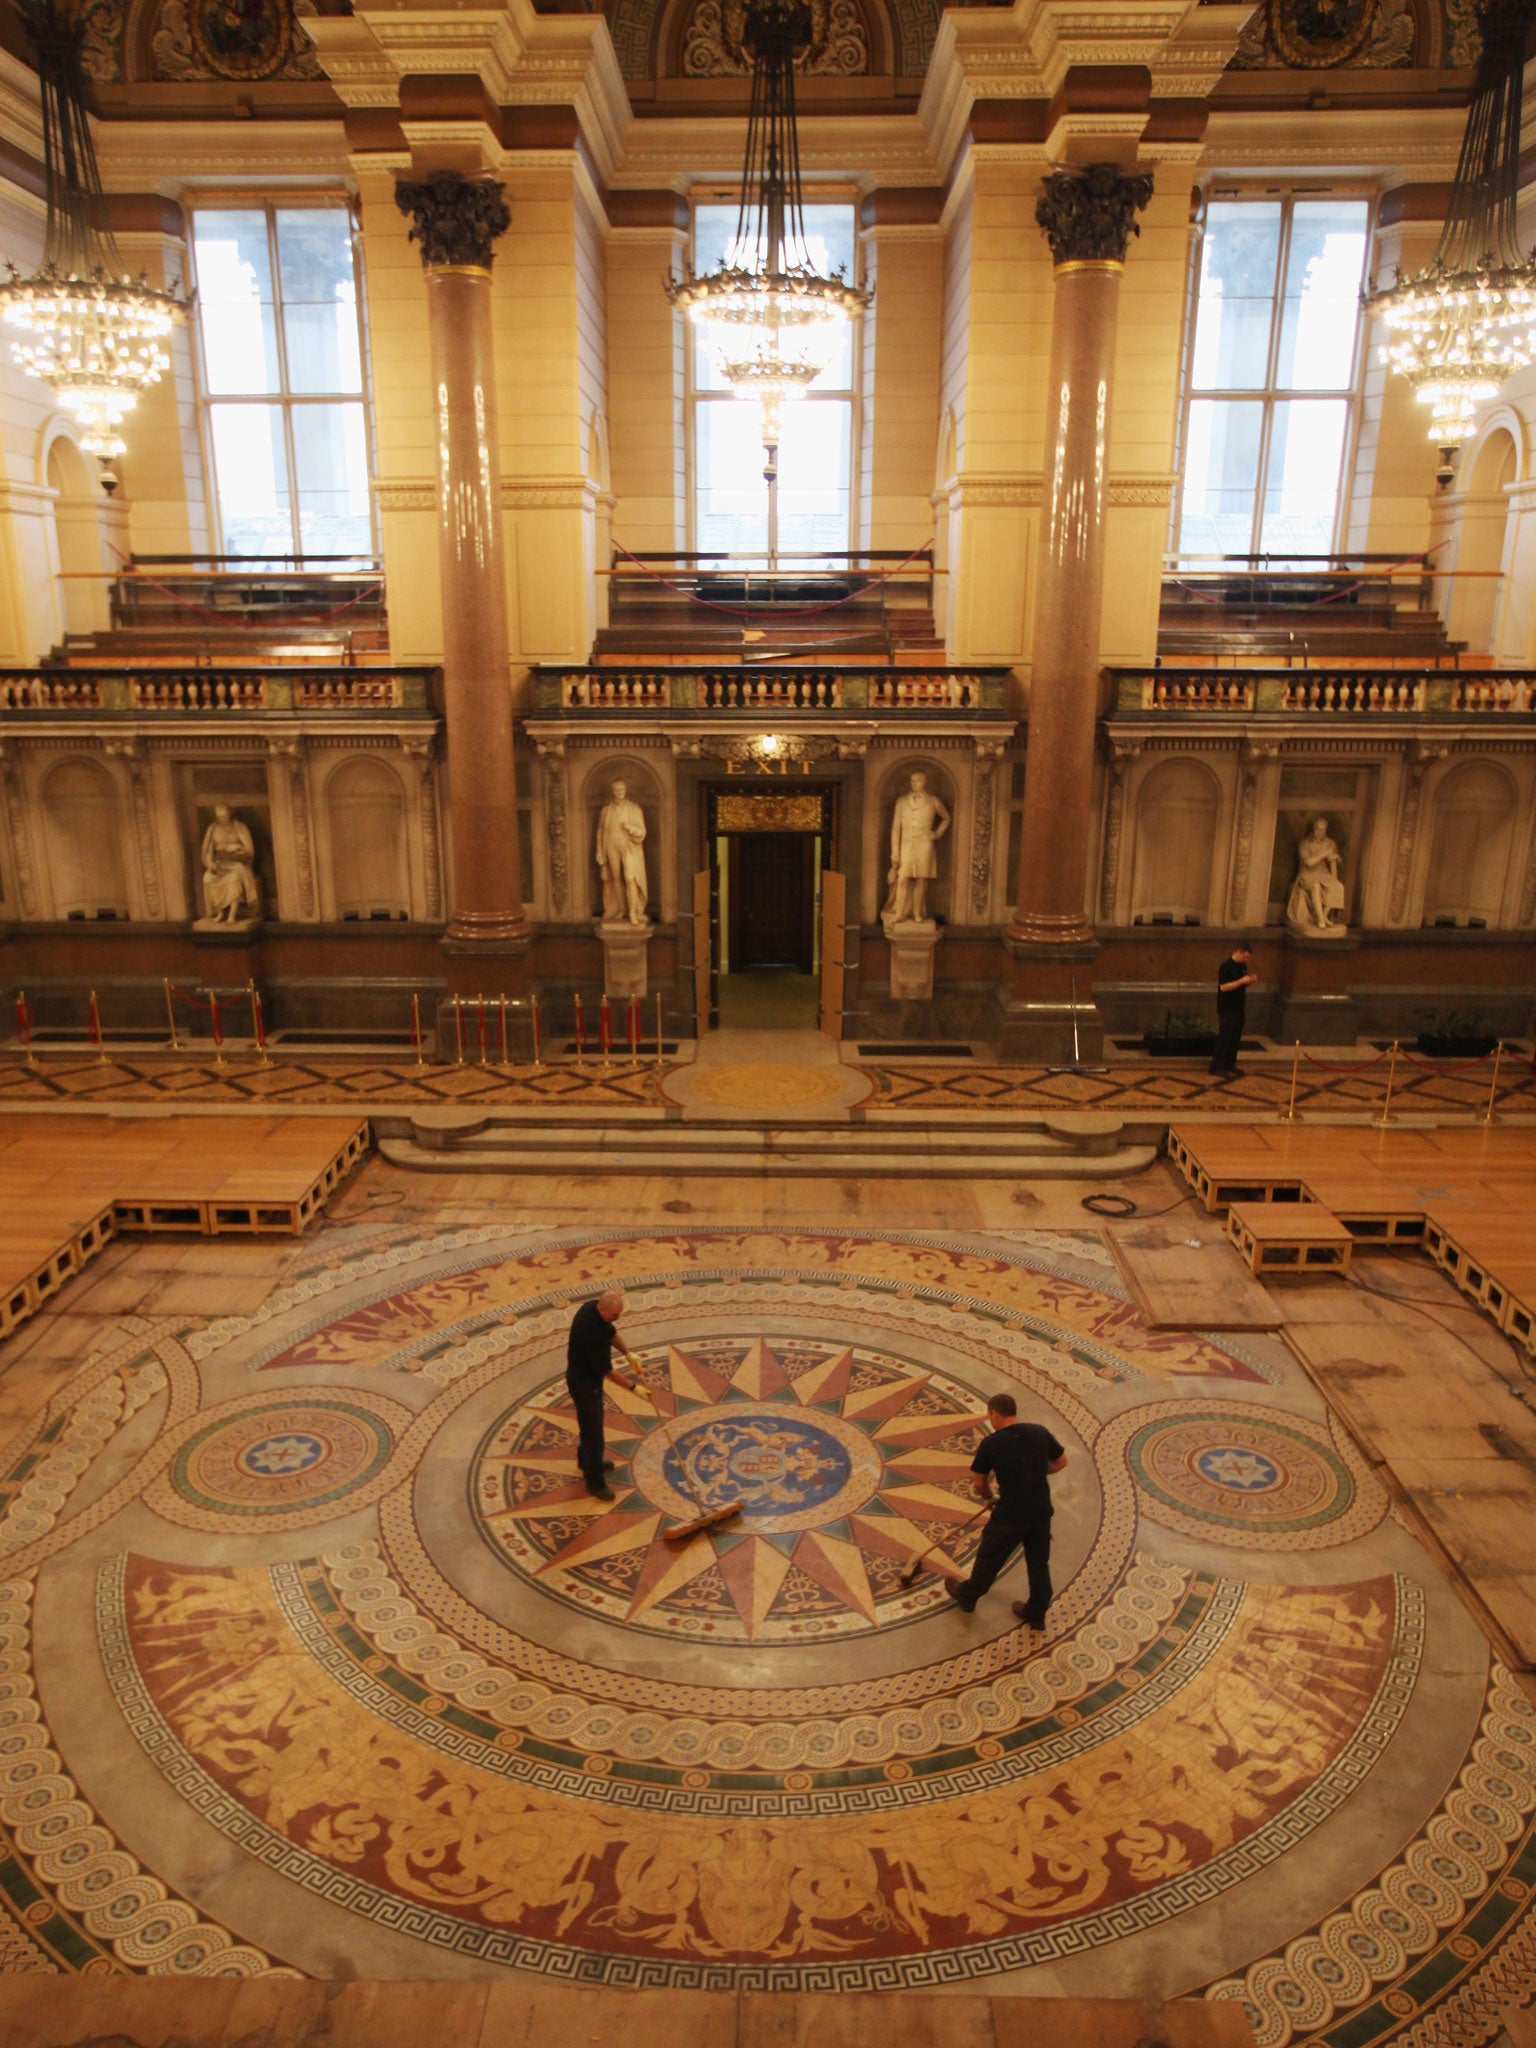 A panicked groom made a hoax-bomb call at St George's Hall, after realising he had forgotten to book it.